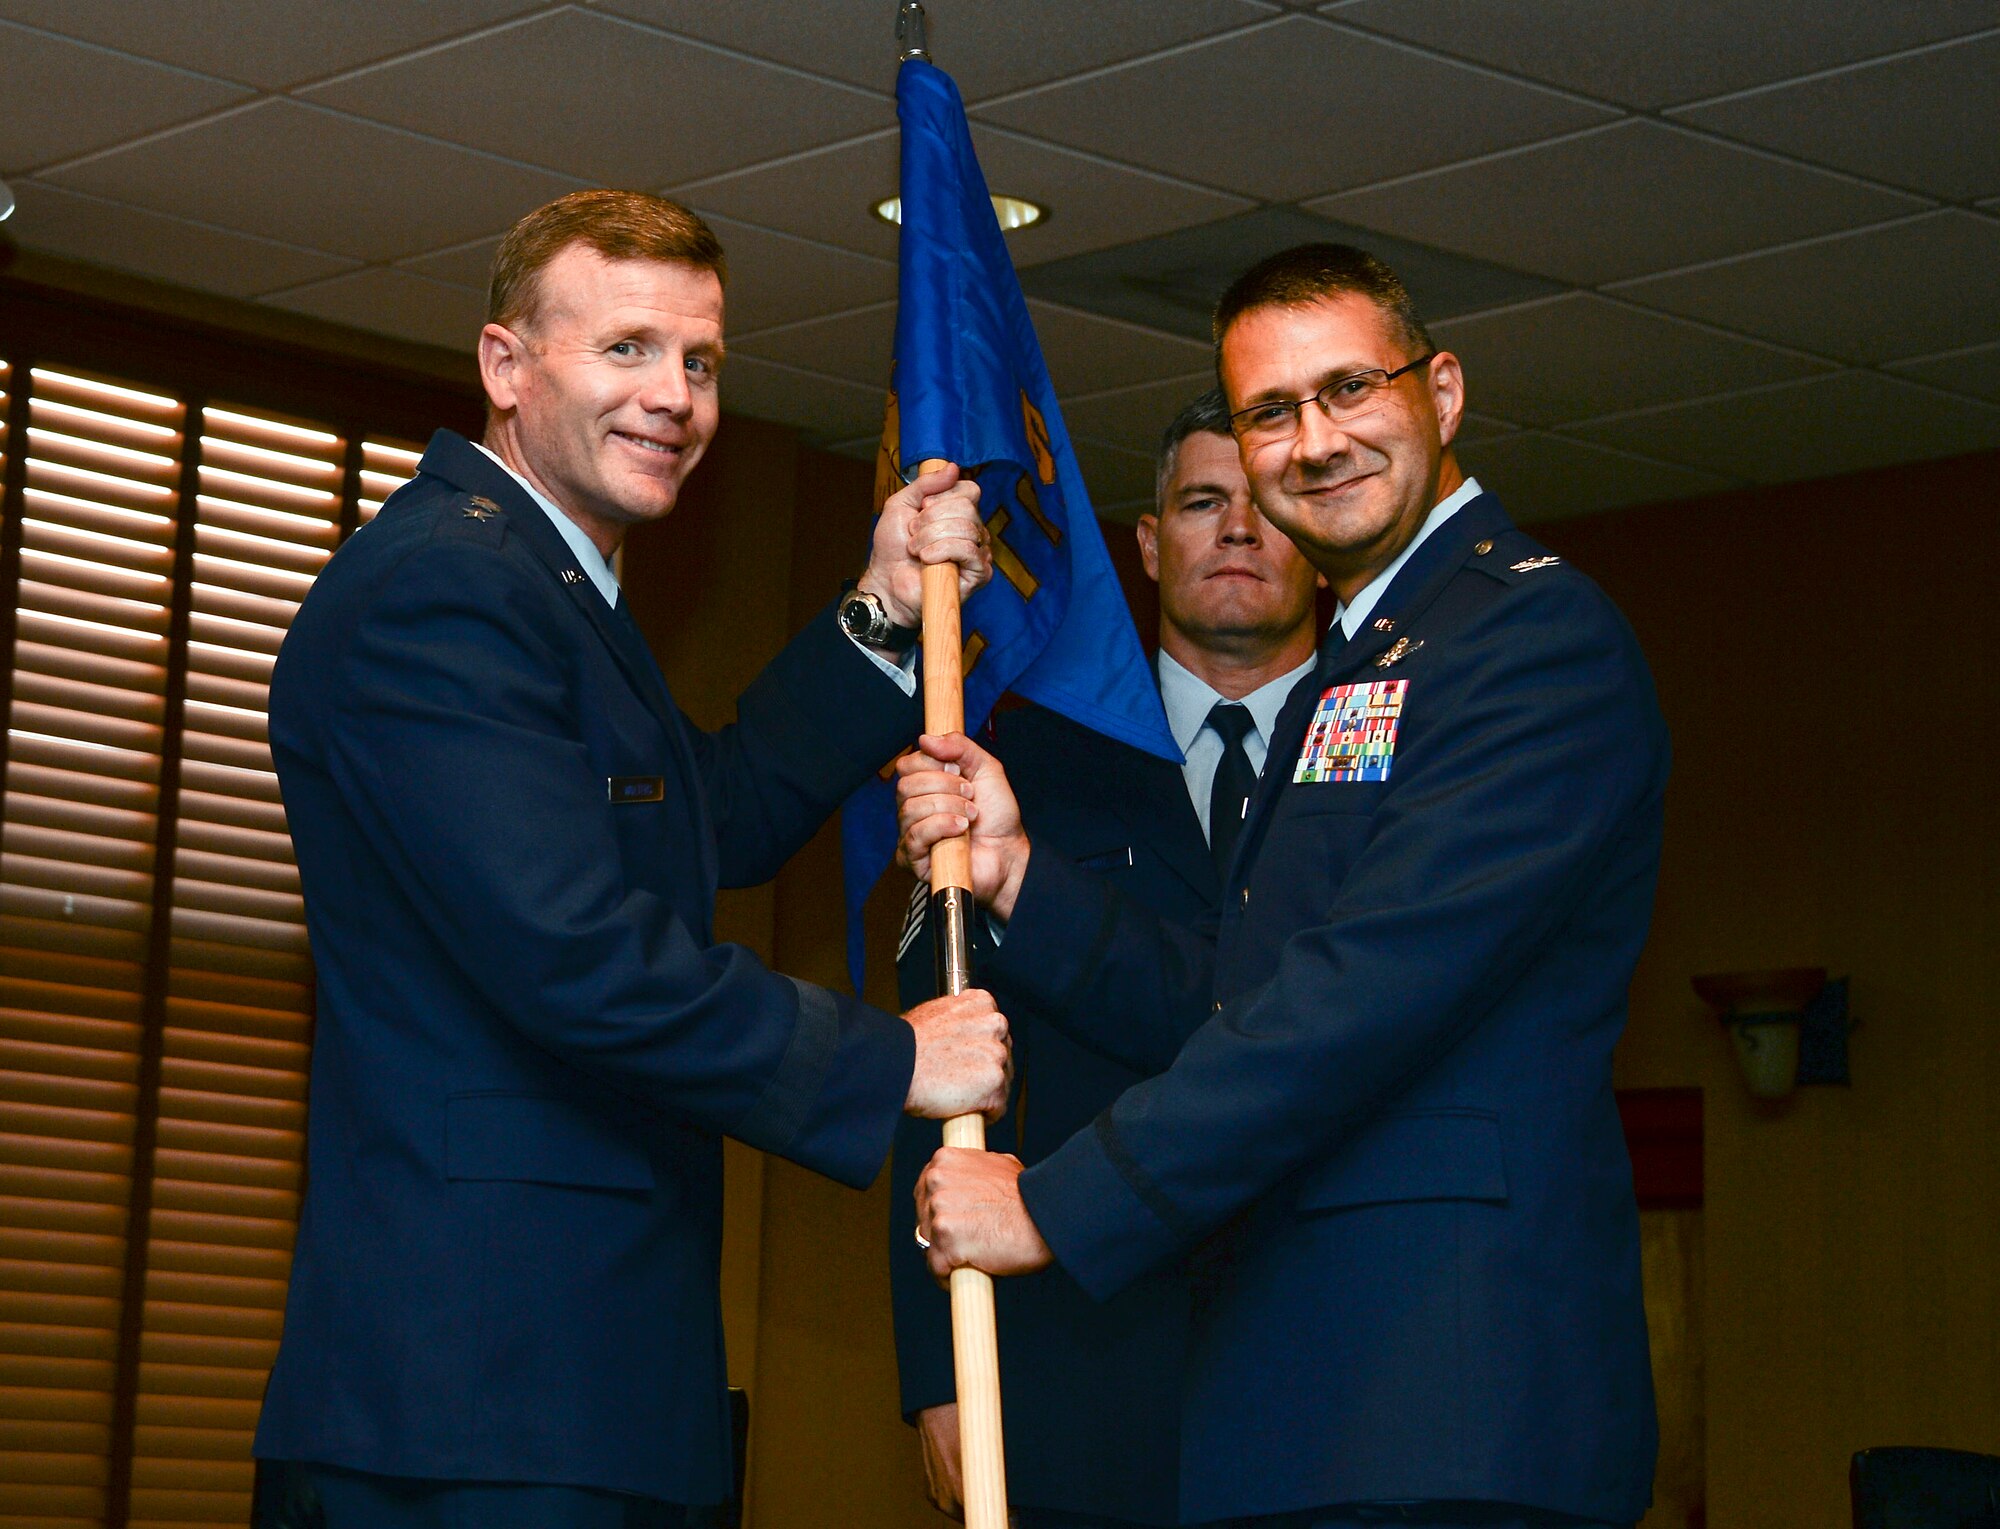 Lt. Gen. Tod Wolters, Commander 12th Air Force (Air Forces Southern) recieves the squadron guideon from Col. Jonathan VanNoord during the 612th Theater Operations Group Change of Command Ceremony on Davis-Monthan AFB, Ariz., June 17, 2014.  VanNoord relinquished command of the 612 TOG to Col. James Sheedy. (U.S. Air Force photo by Tech. Sgt. Heather R. Redman/Released)